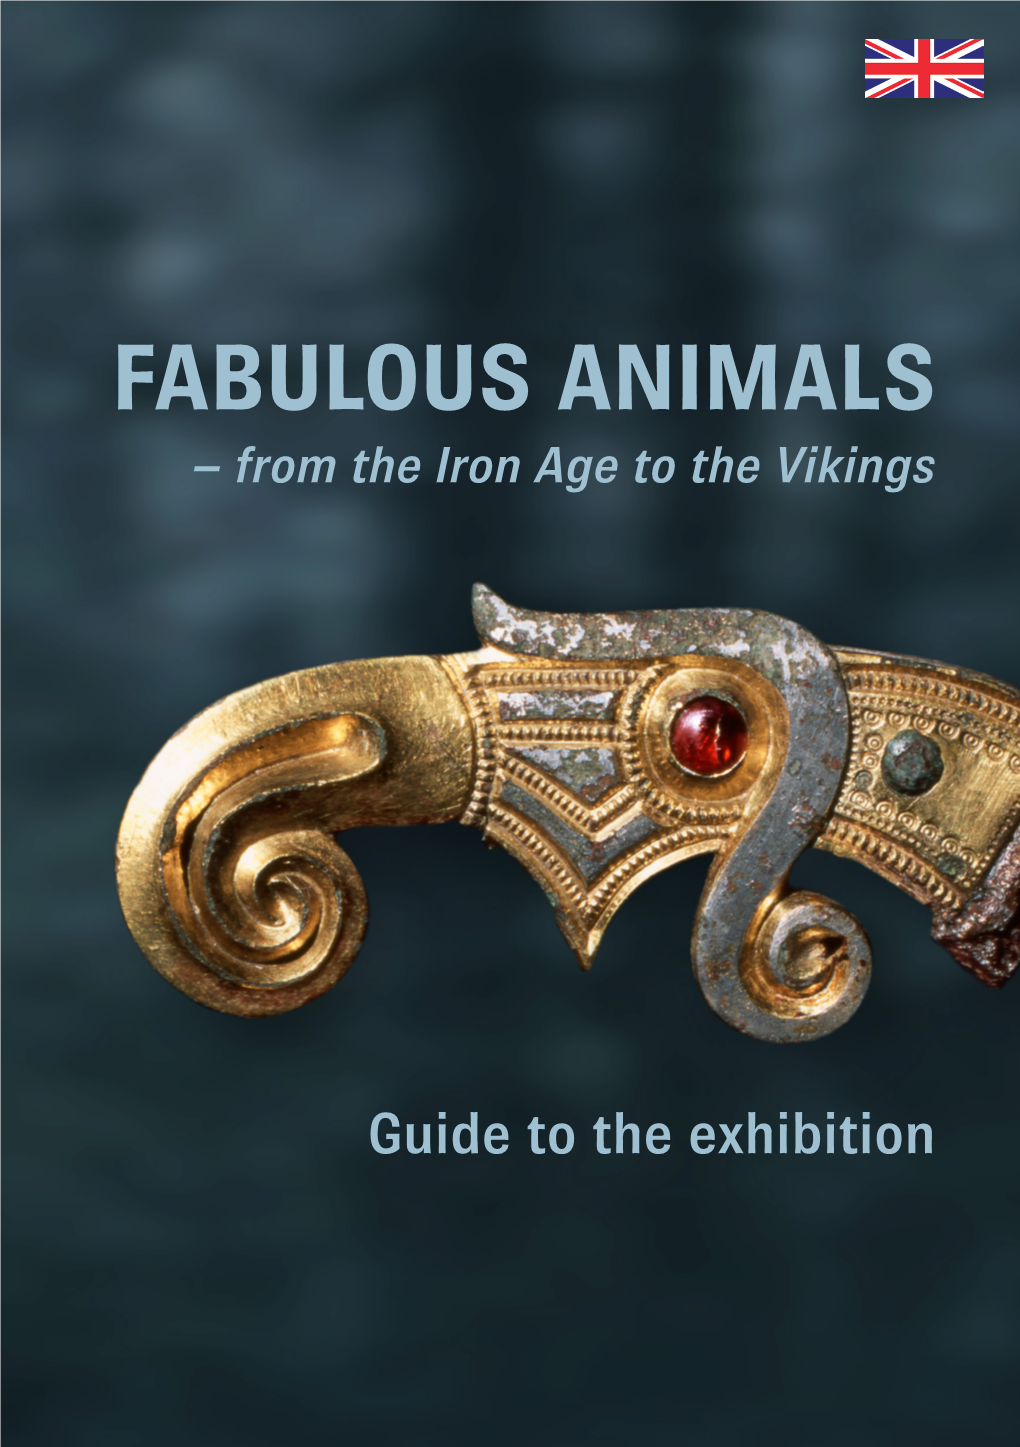 FABULOUS ANIMALS – from the Iron Age to the Vikings